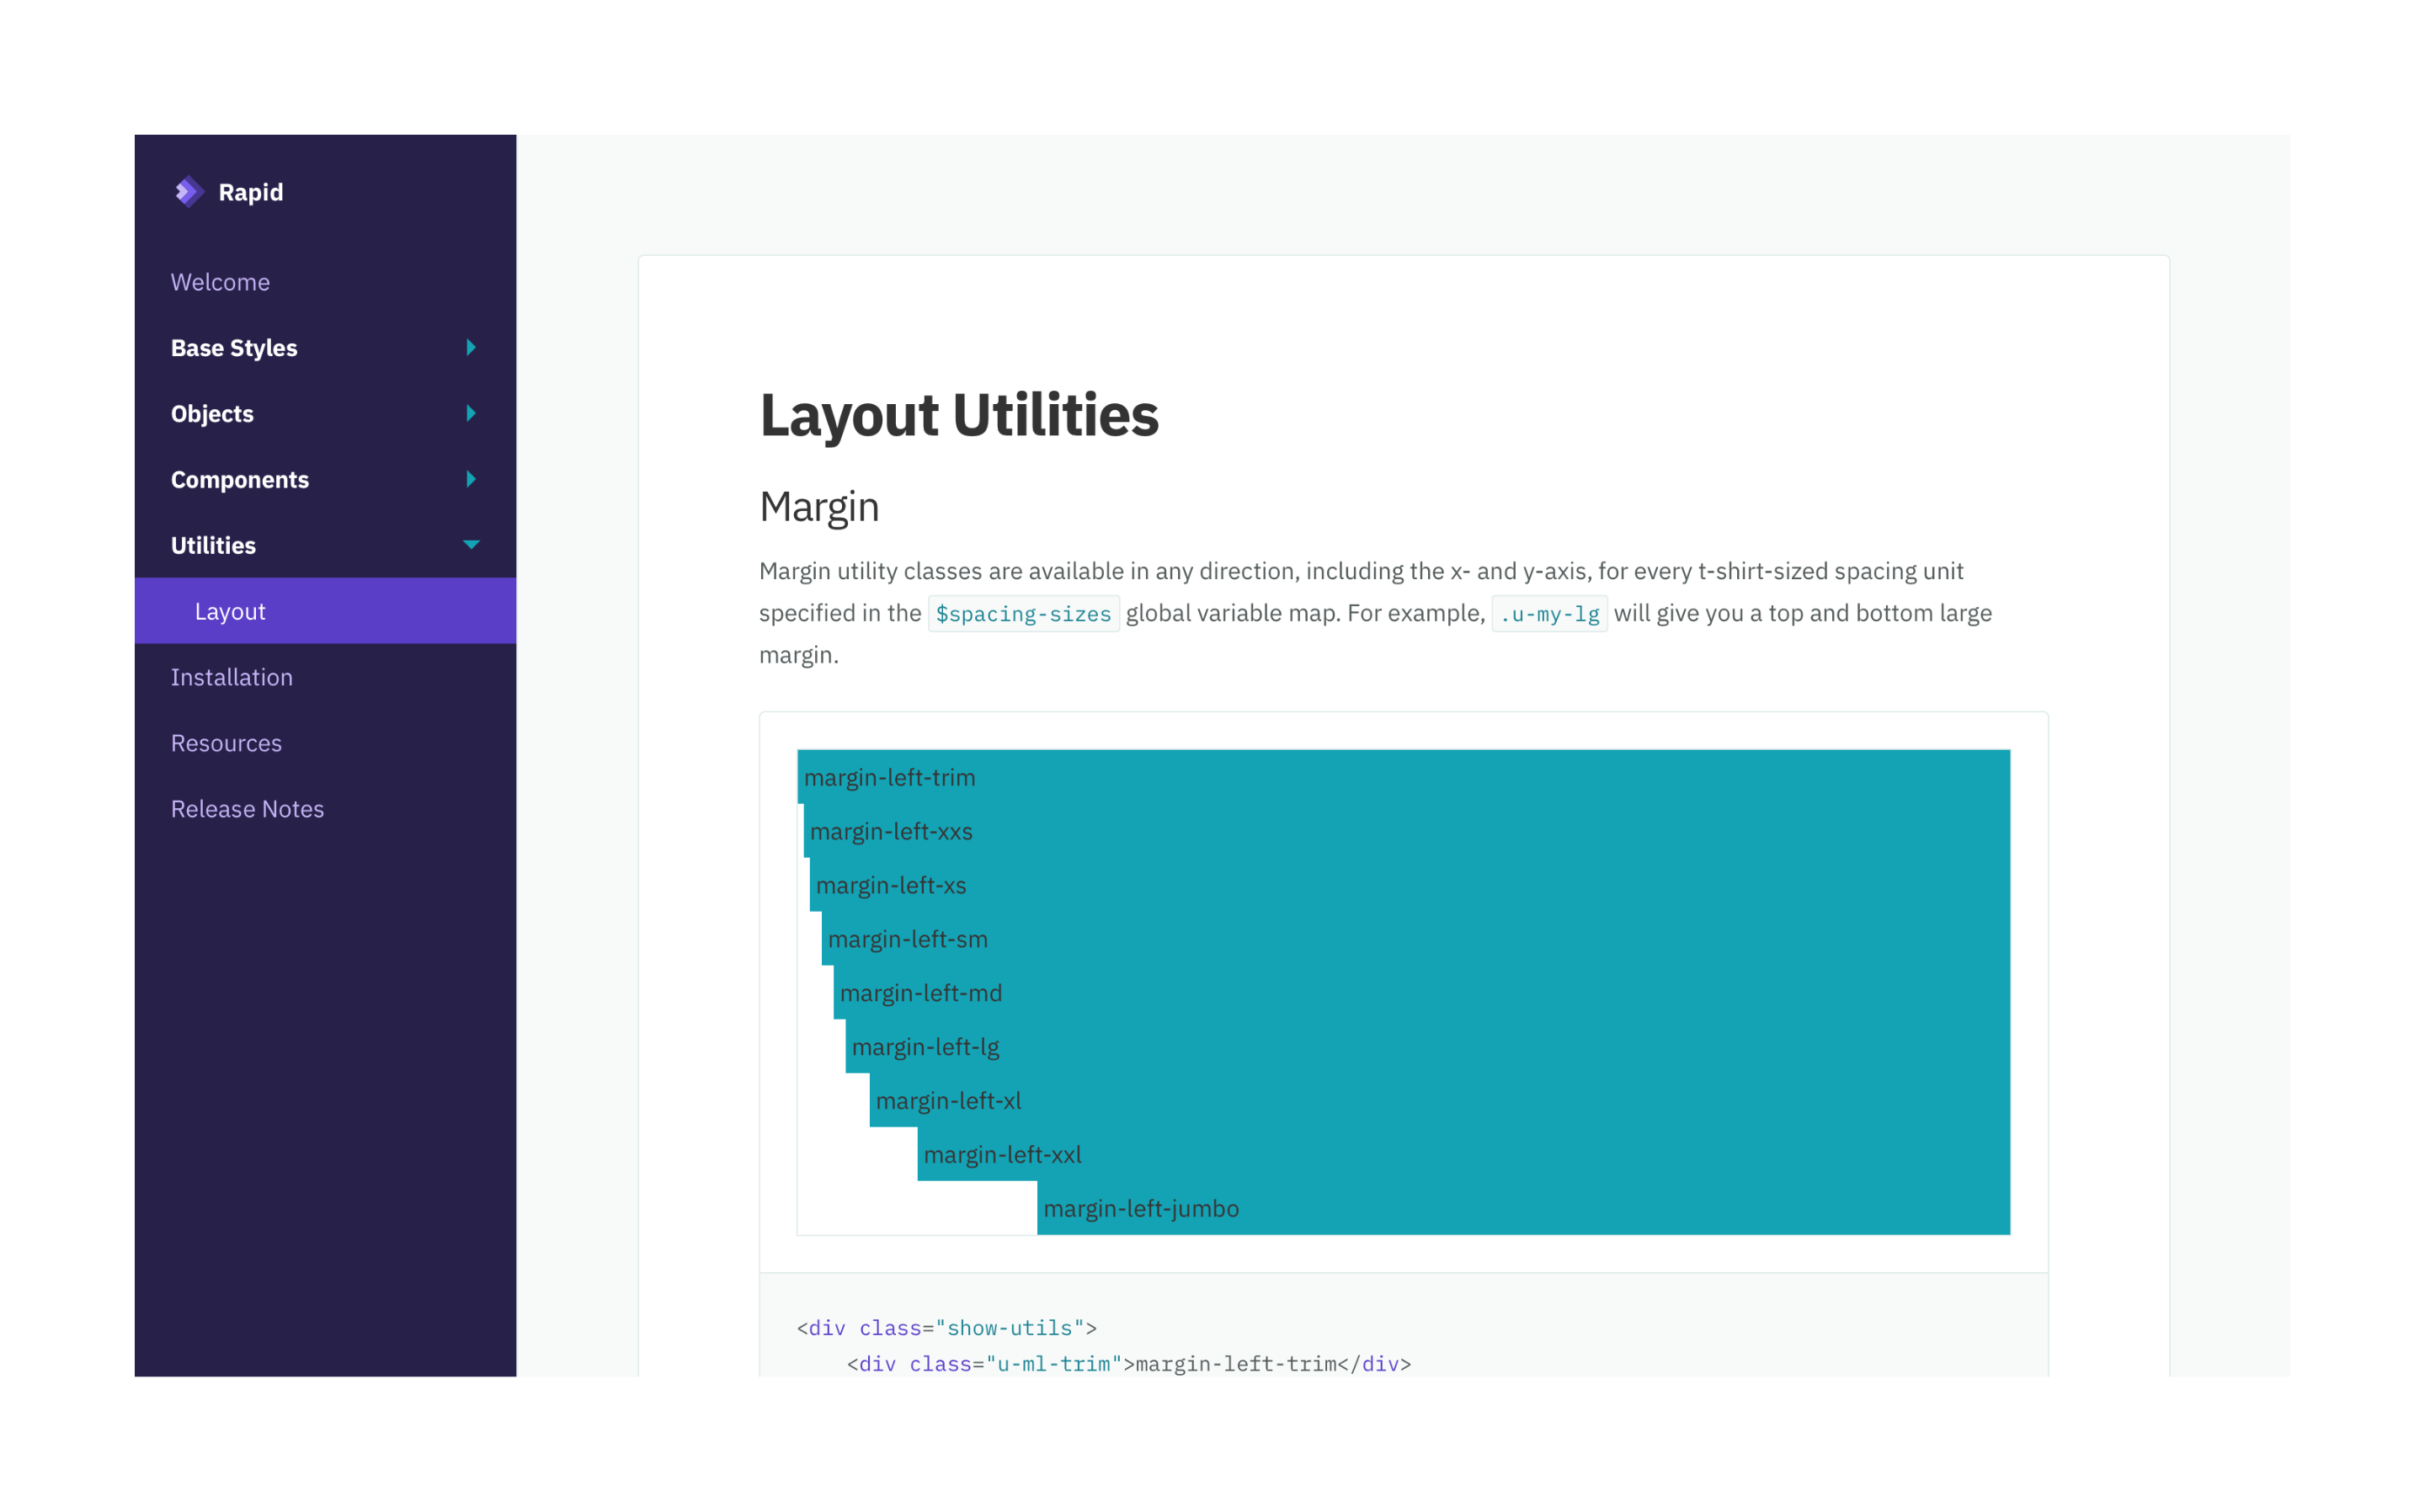 The layout utilities page of Rapid’s documentation website